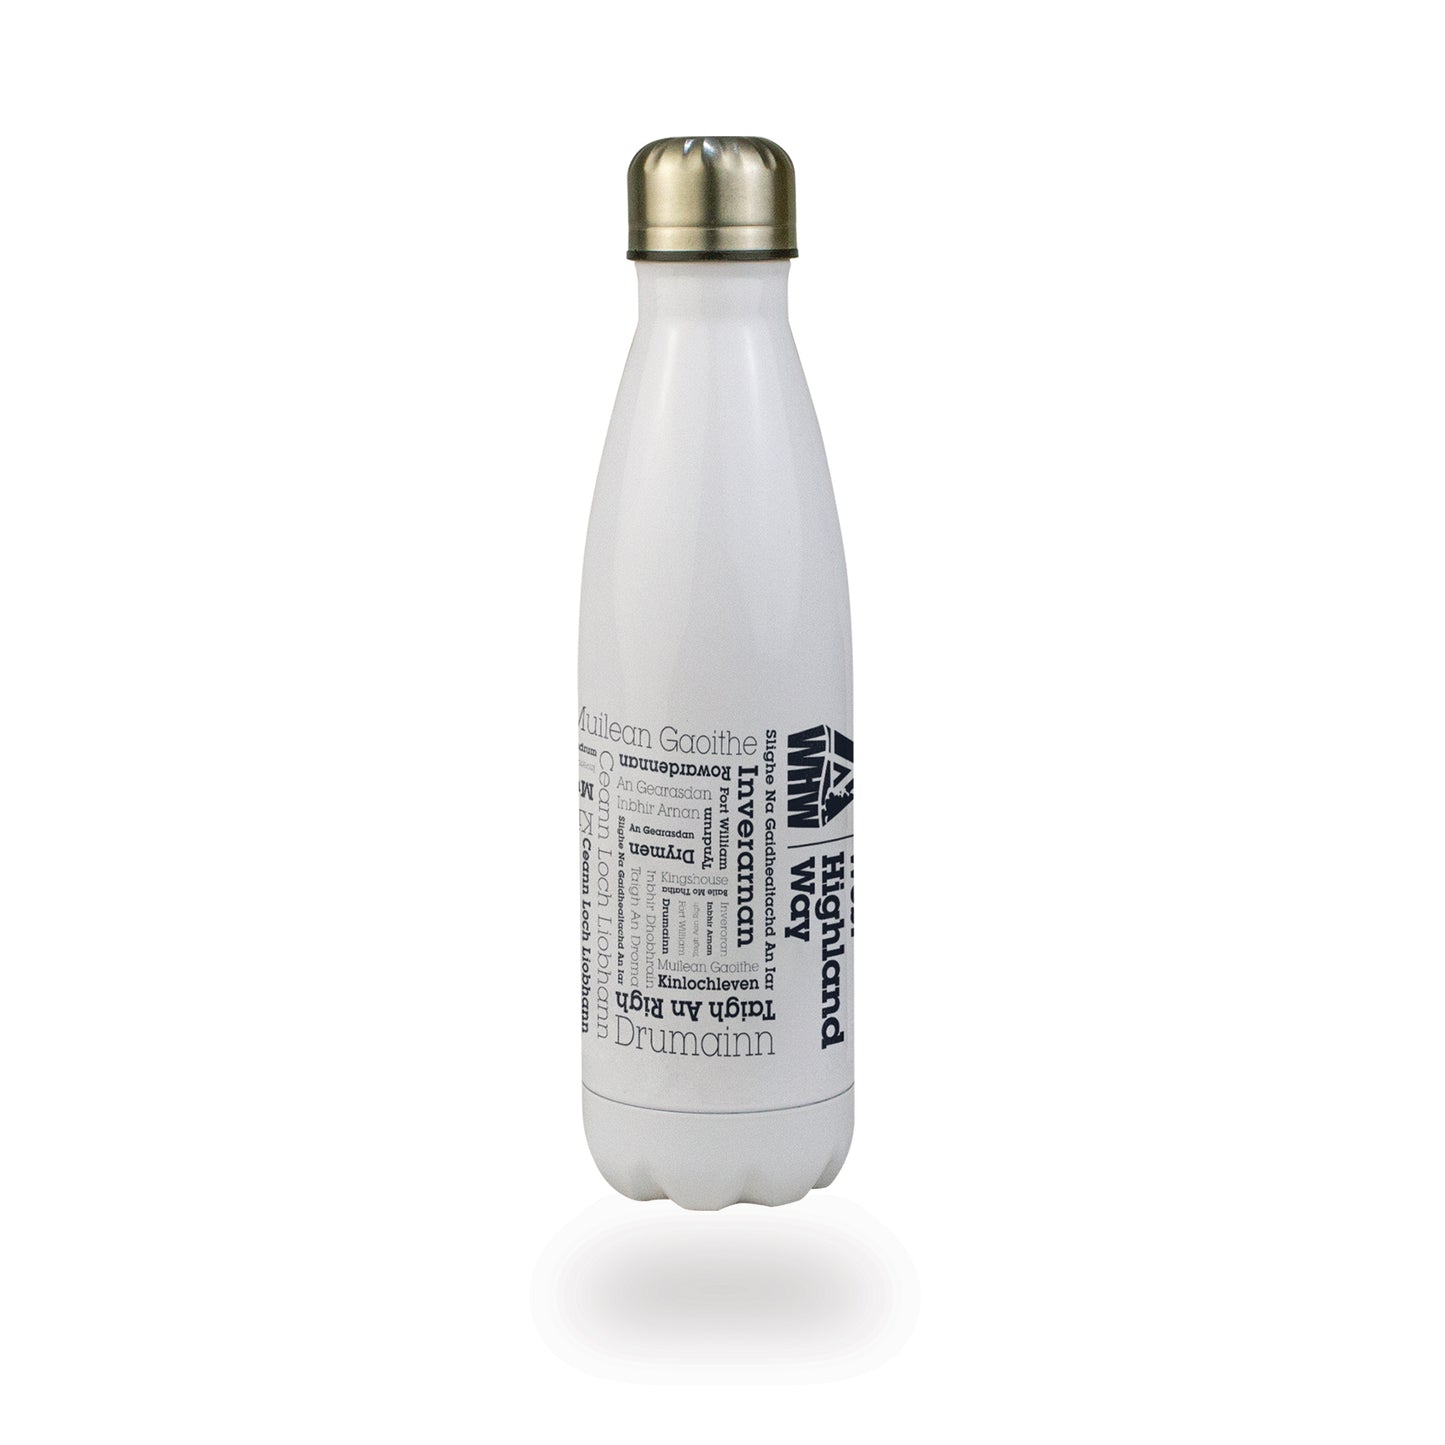 West Highland Way Places stainless steel water bottle